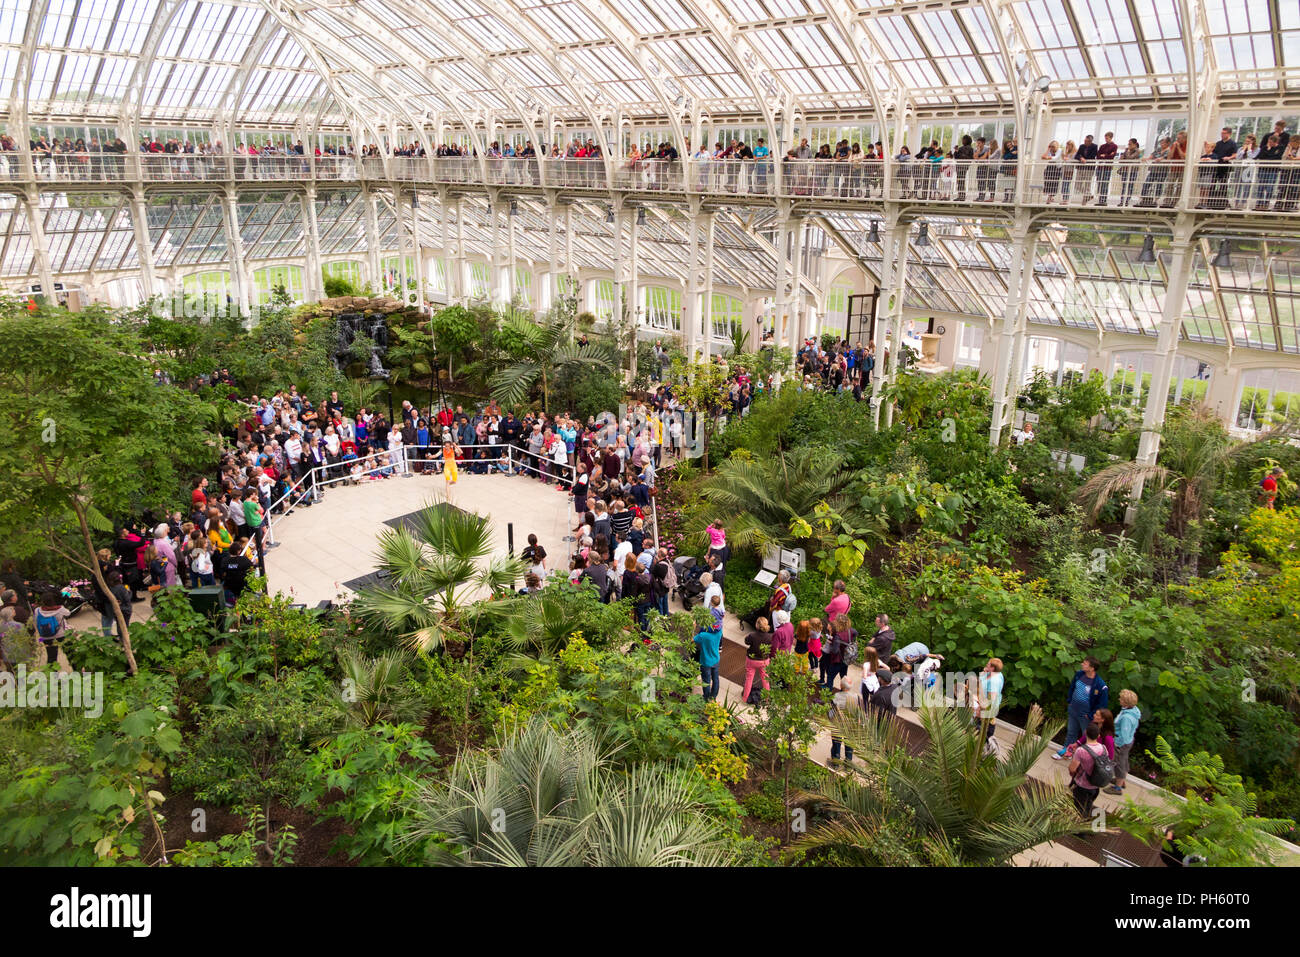 Acrobatic and musical performance / Harmonic by Cirque Bijou watched by visitor audience during holiday at Kew gardens / Royal botanic garden. London Stock Photo